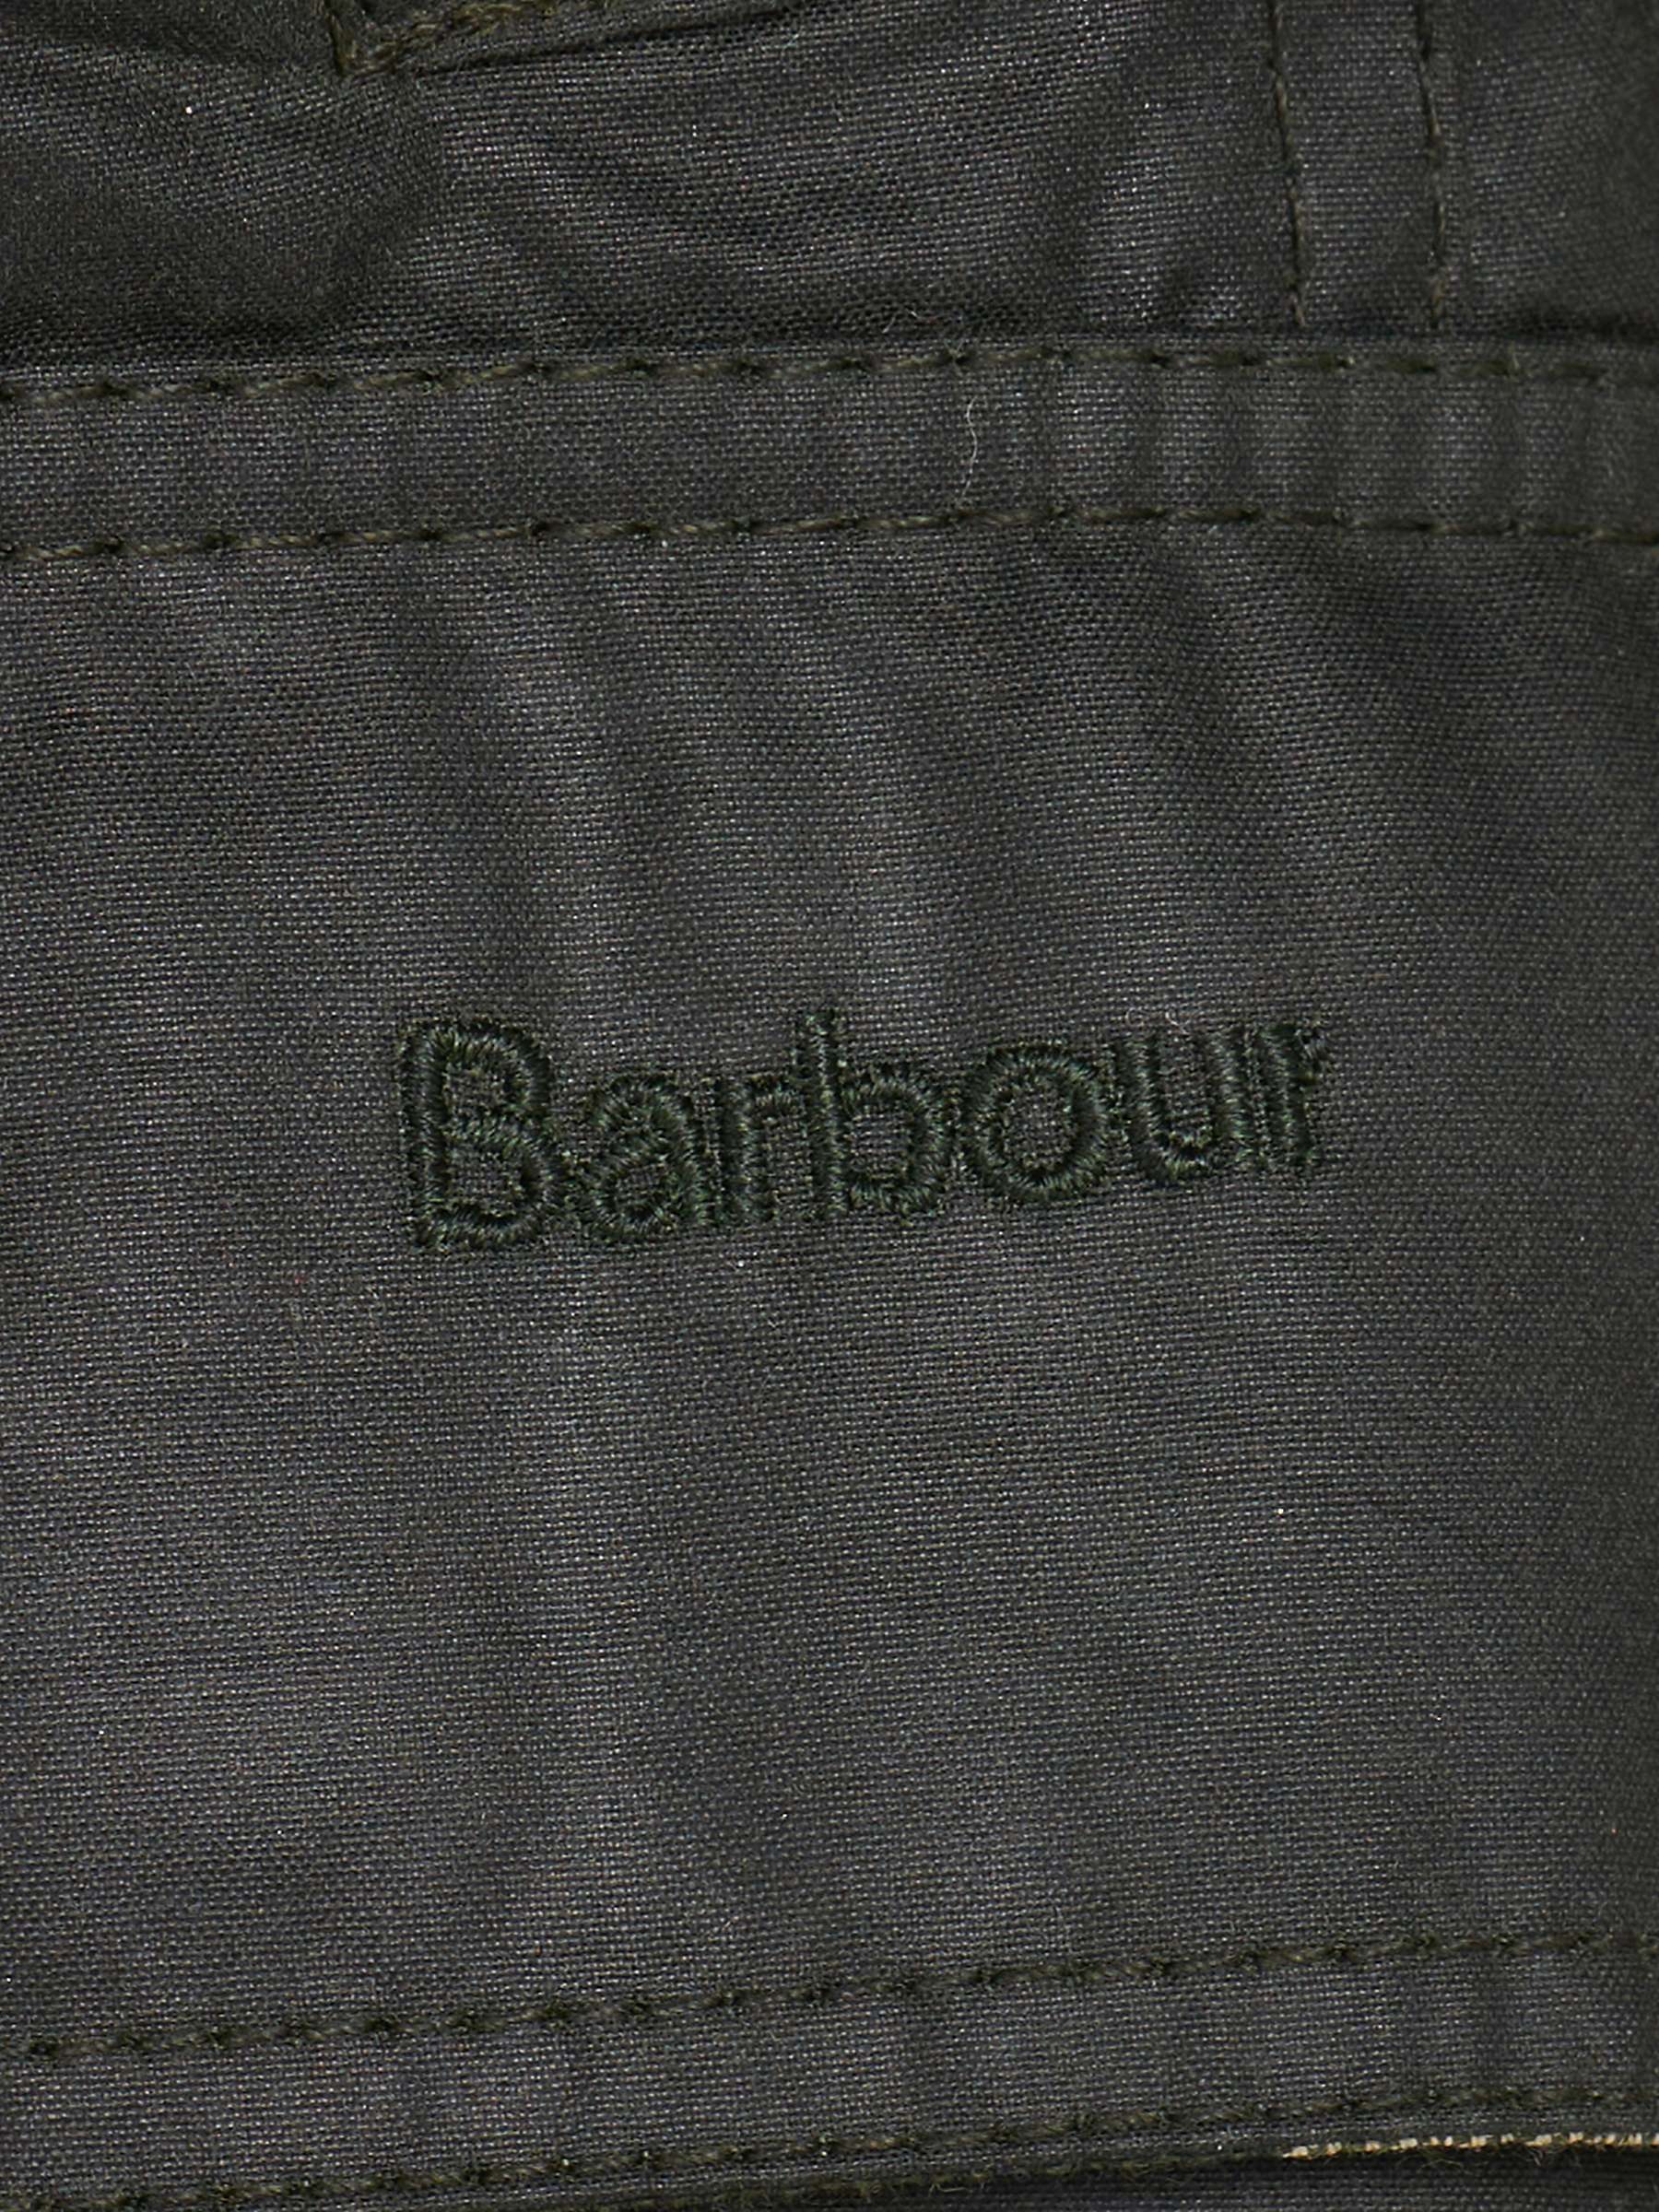 Buy Barbour Classic Beadnell Waxed Jacket, Sage Online at johnlewis.com